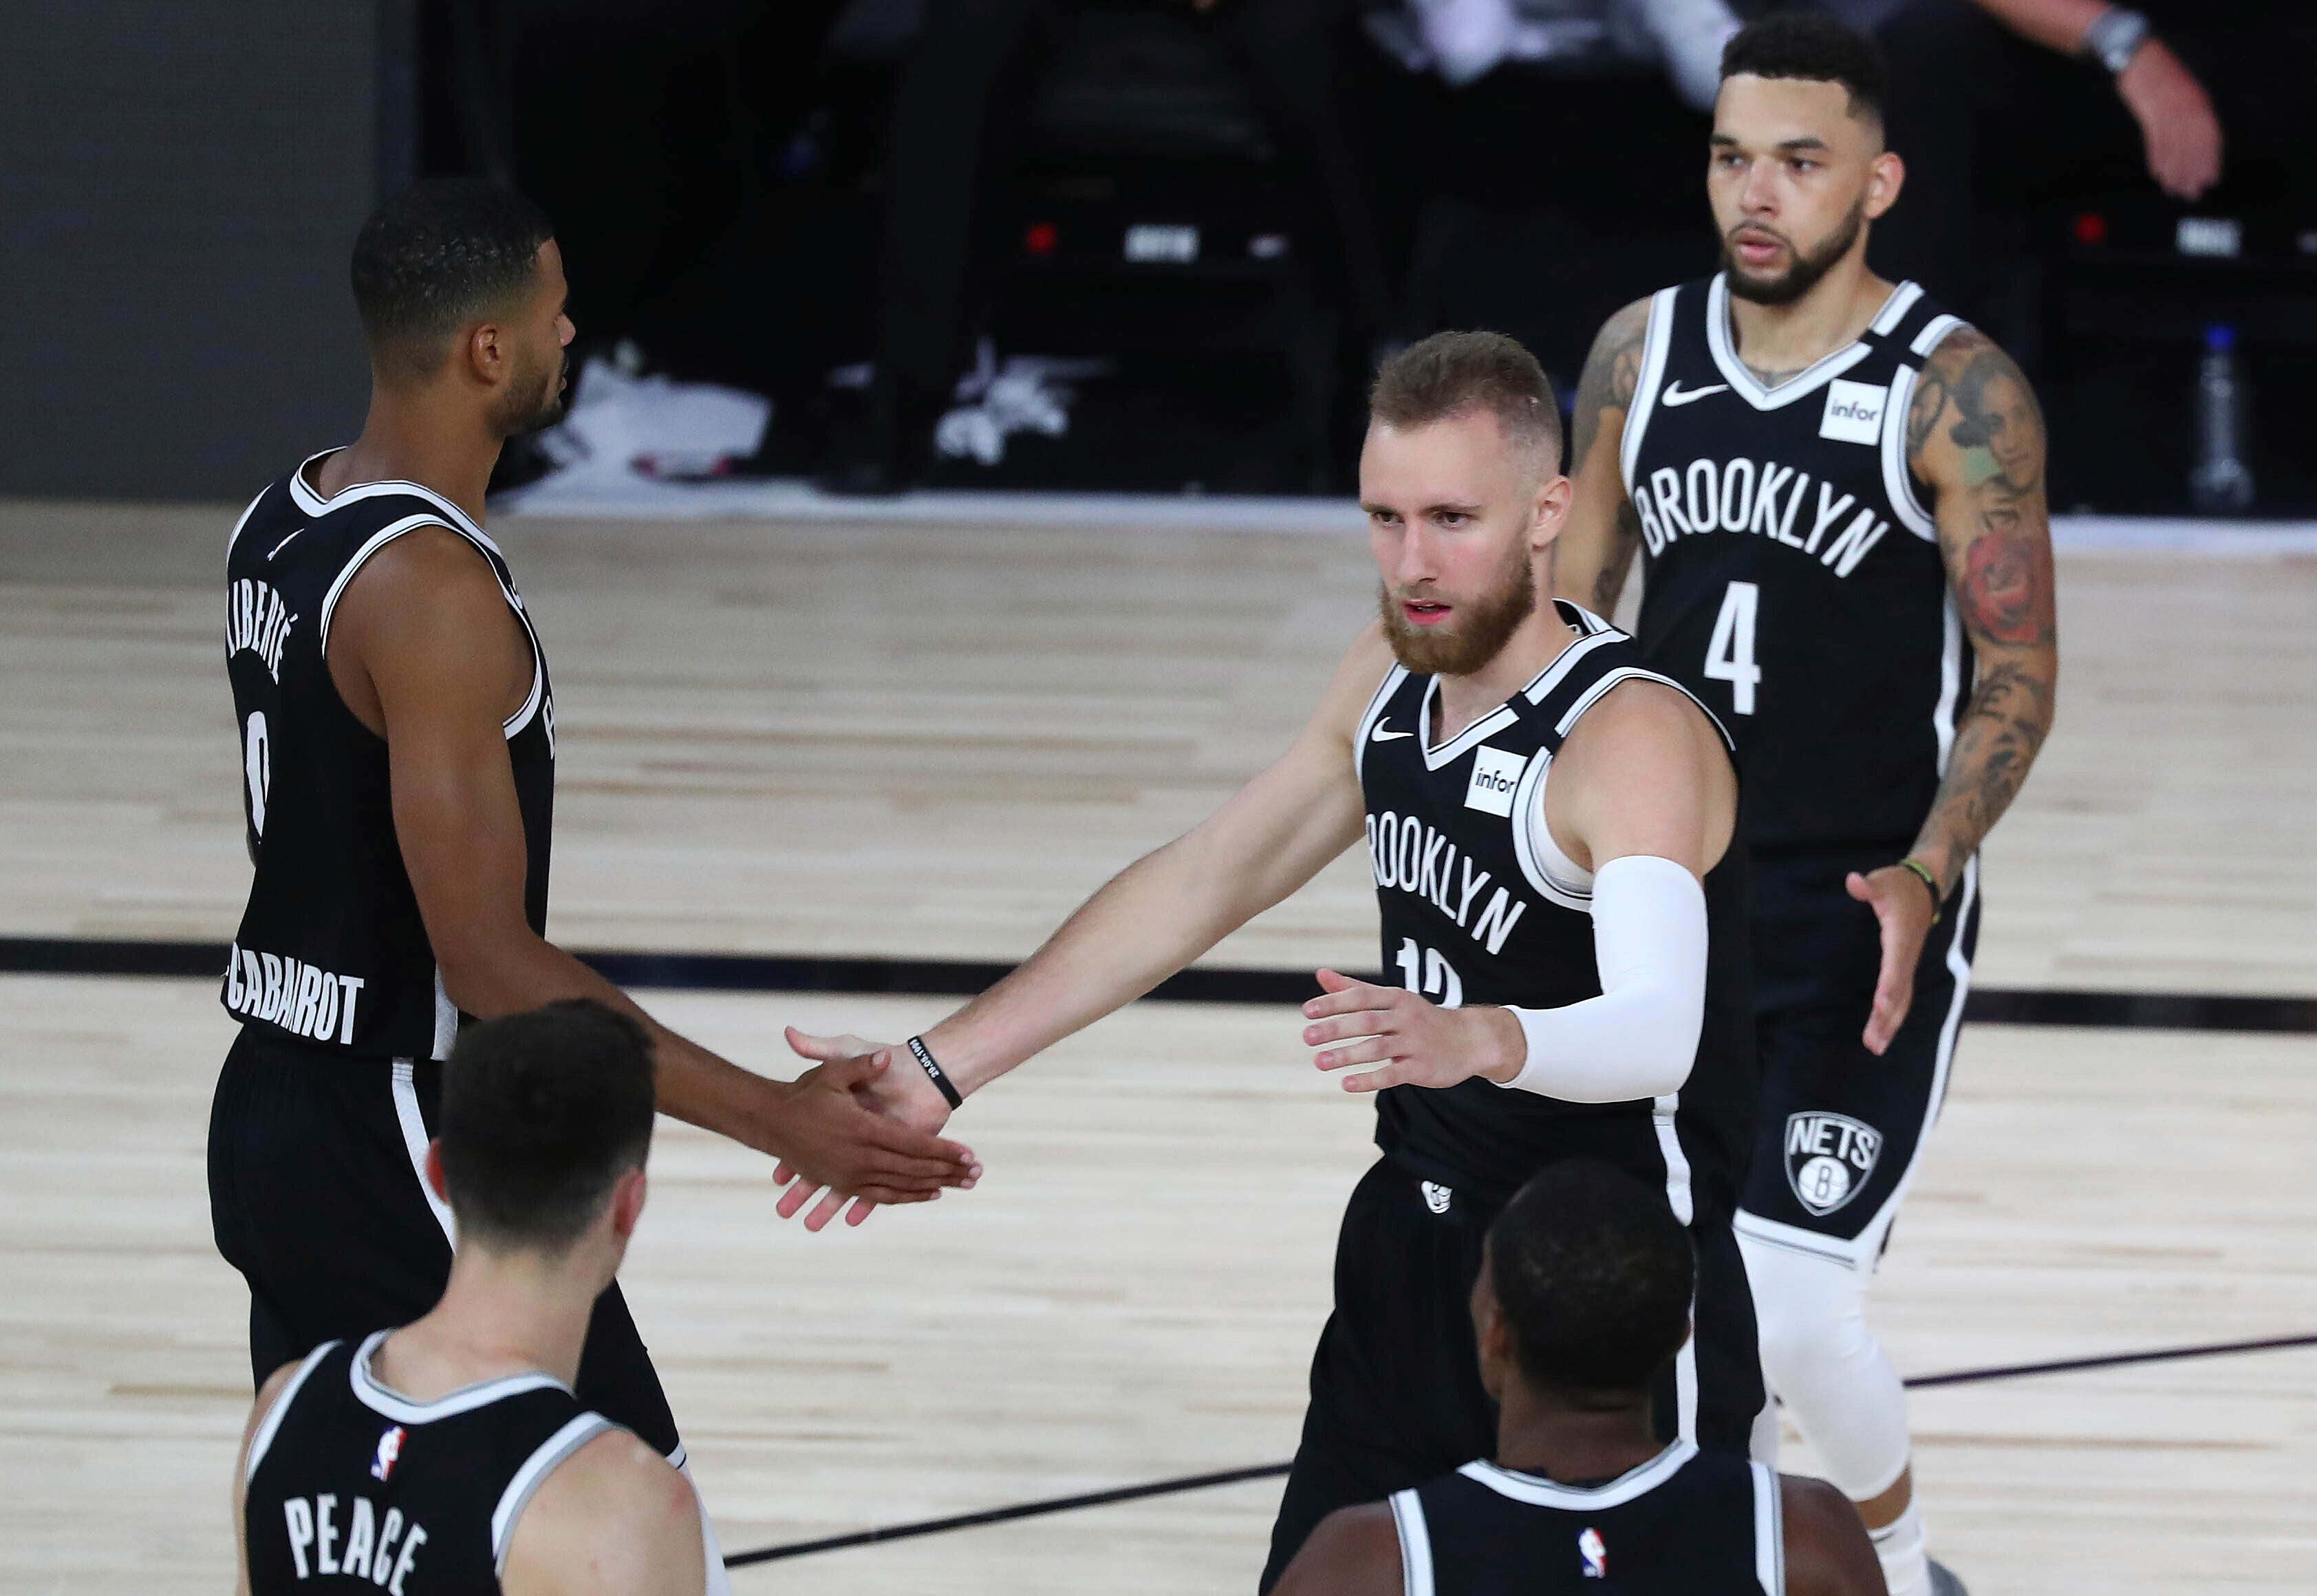 Brooklyn Nets guard Dzanan Musa (13) is congratulated after scoring a basket and drawing a foul against the Toronto Raptors during the second half of Game 4 of an NBA basketball first-round playoff series, Sunday, Aug. 23, 2020, in Lake Buena Vista, Fla.